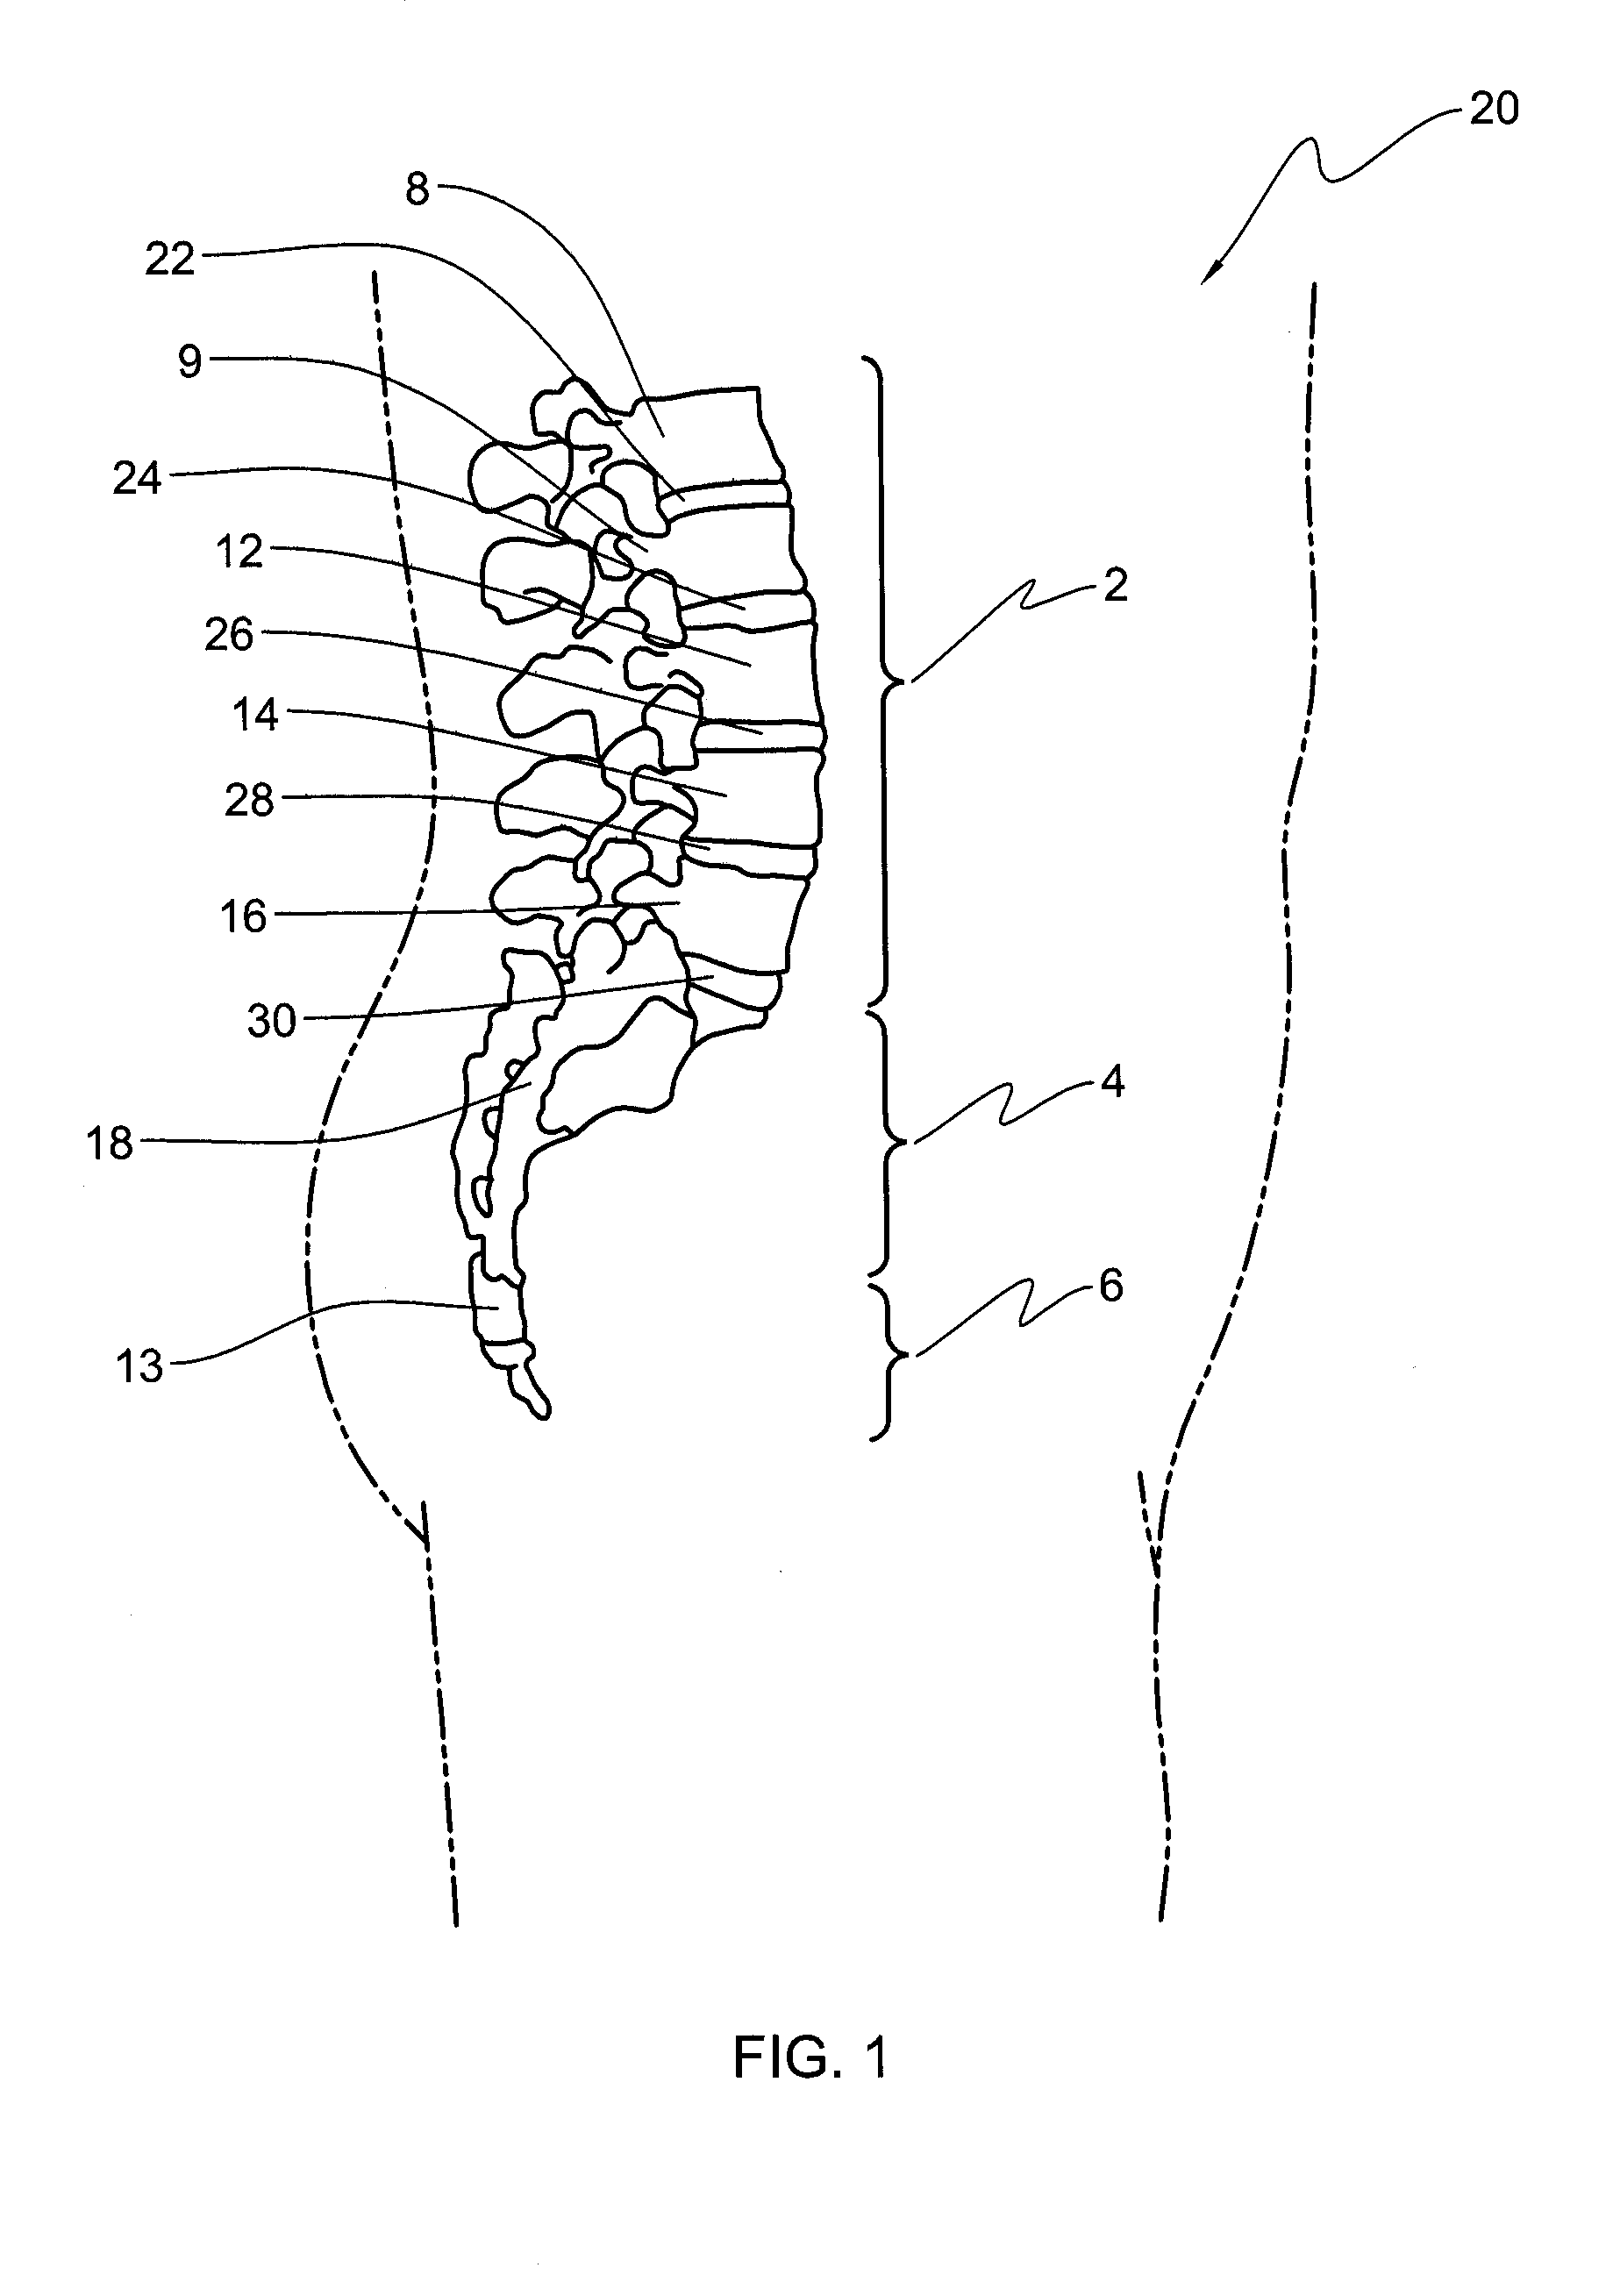 Spinal implant system